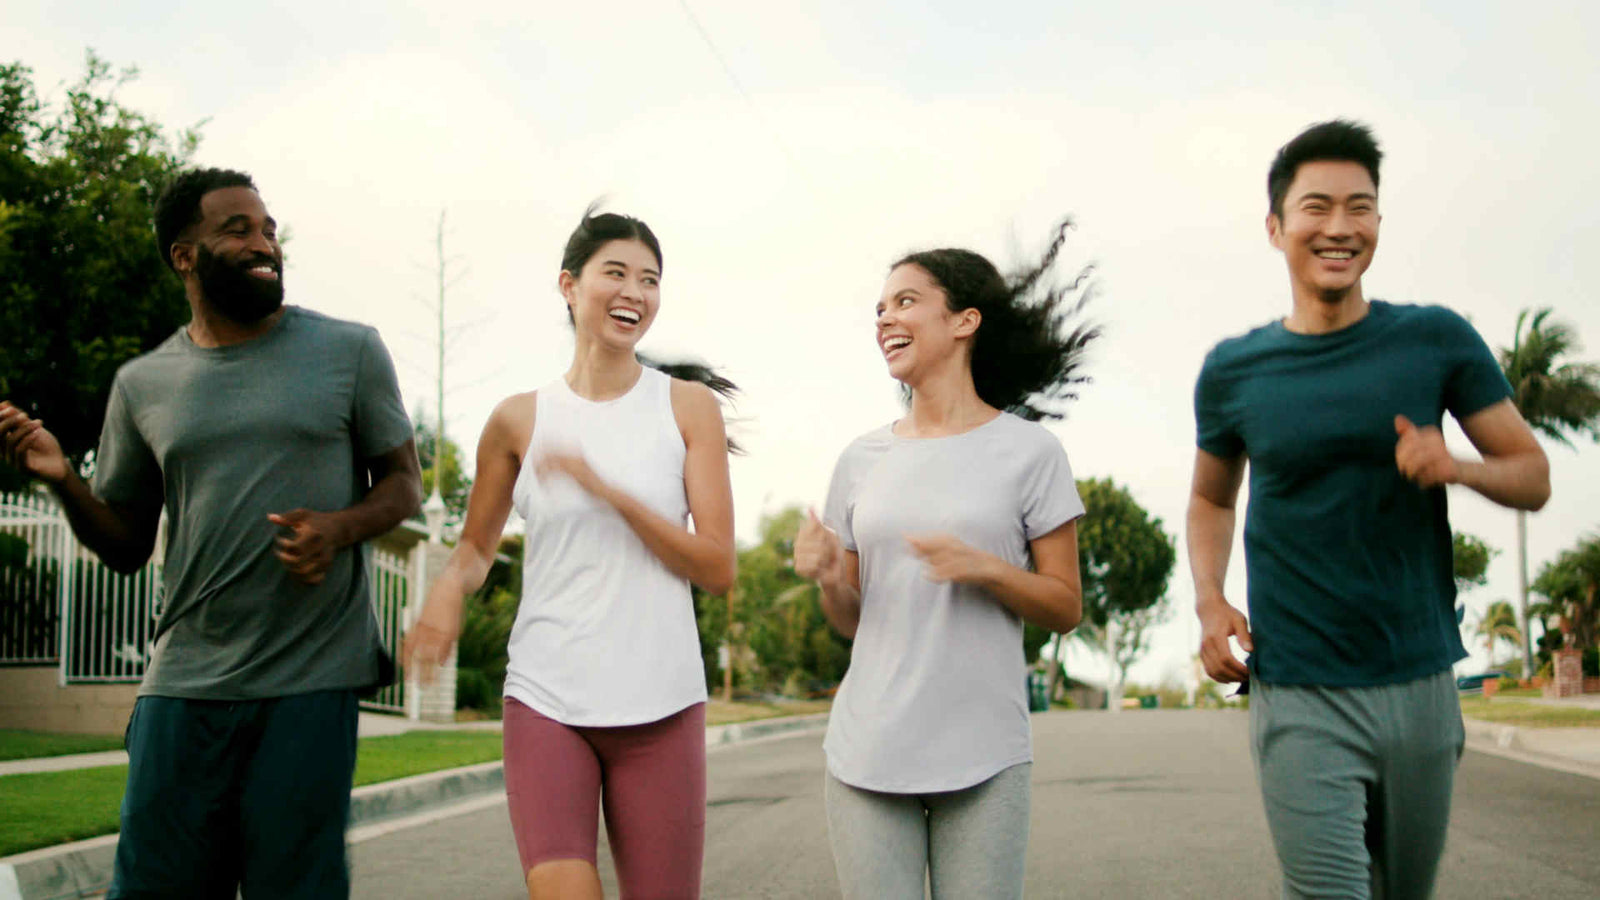 health is a daily routine. four people enjoying their daily routine of running